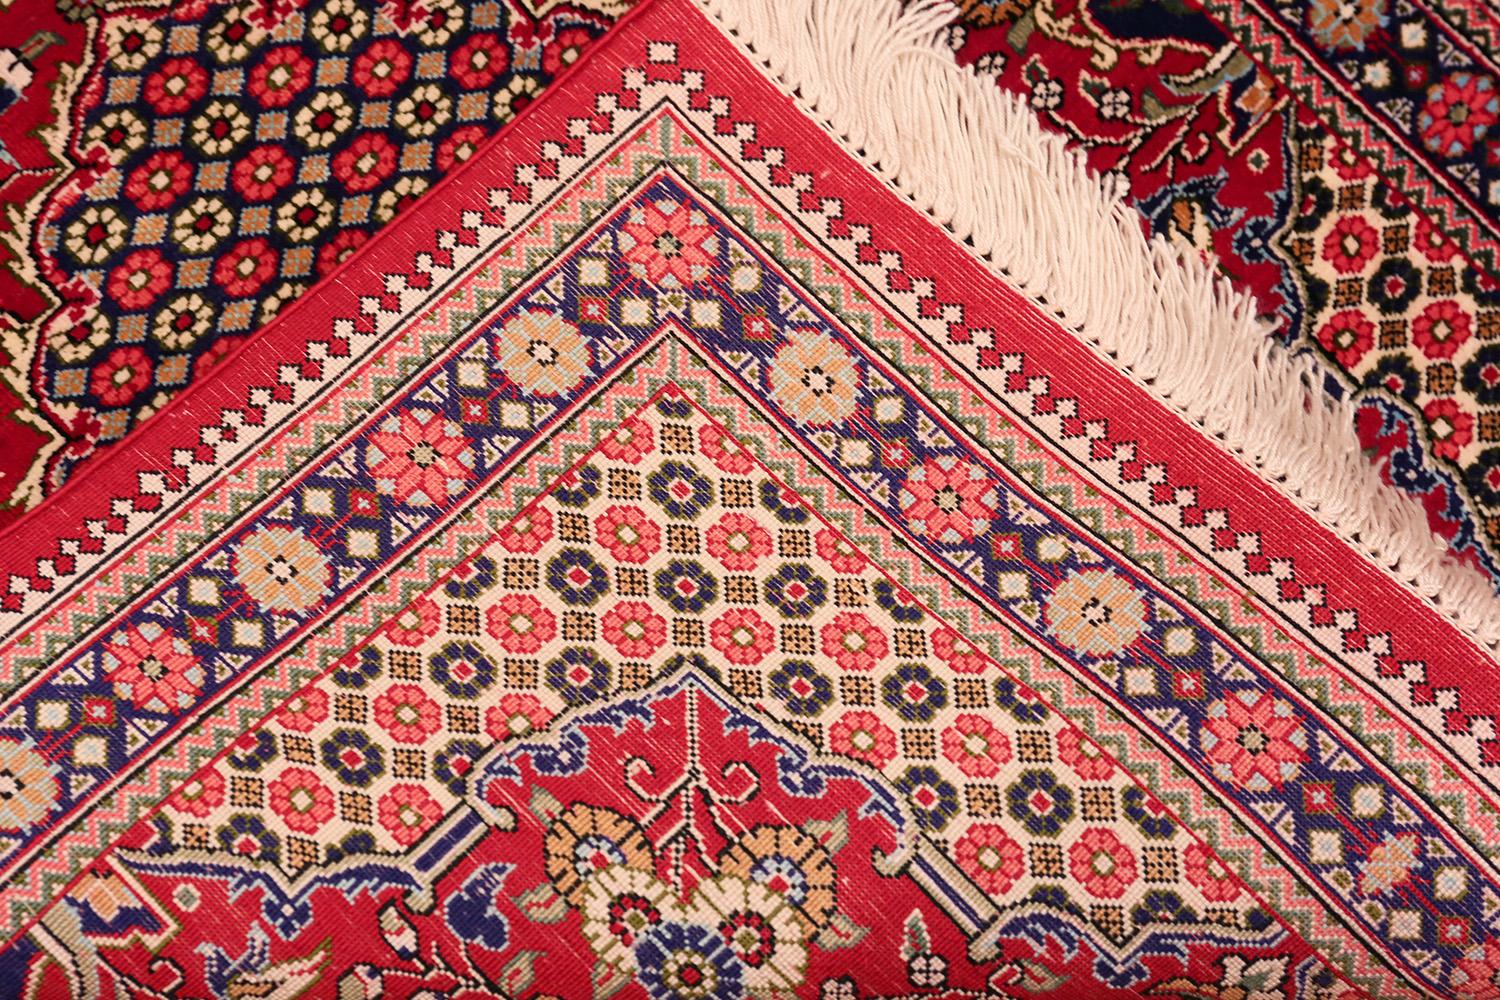 Stunning Vase Design Small Vintage Silk Persian Qum Rug , Country of Origin / Rug Type: Vintage Persian Rug, Circa Date: Late 20th Century - Size: 1 ft 9 in x 2 ft 4 in (0.53 m x 0.71 m).